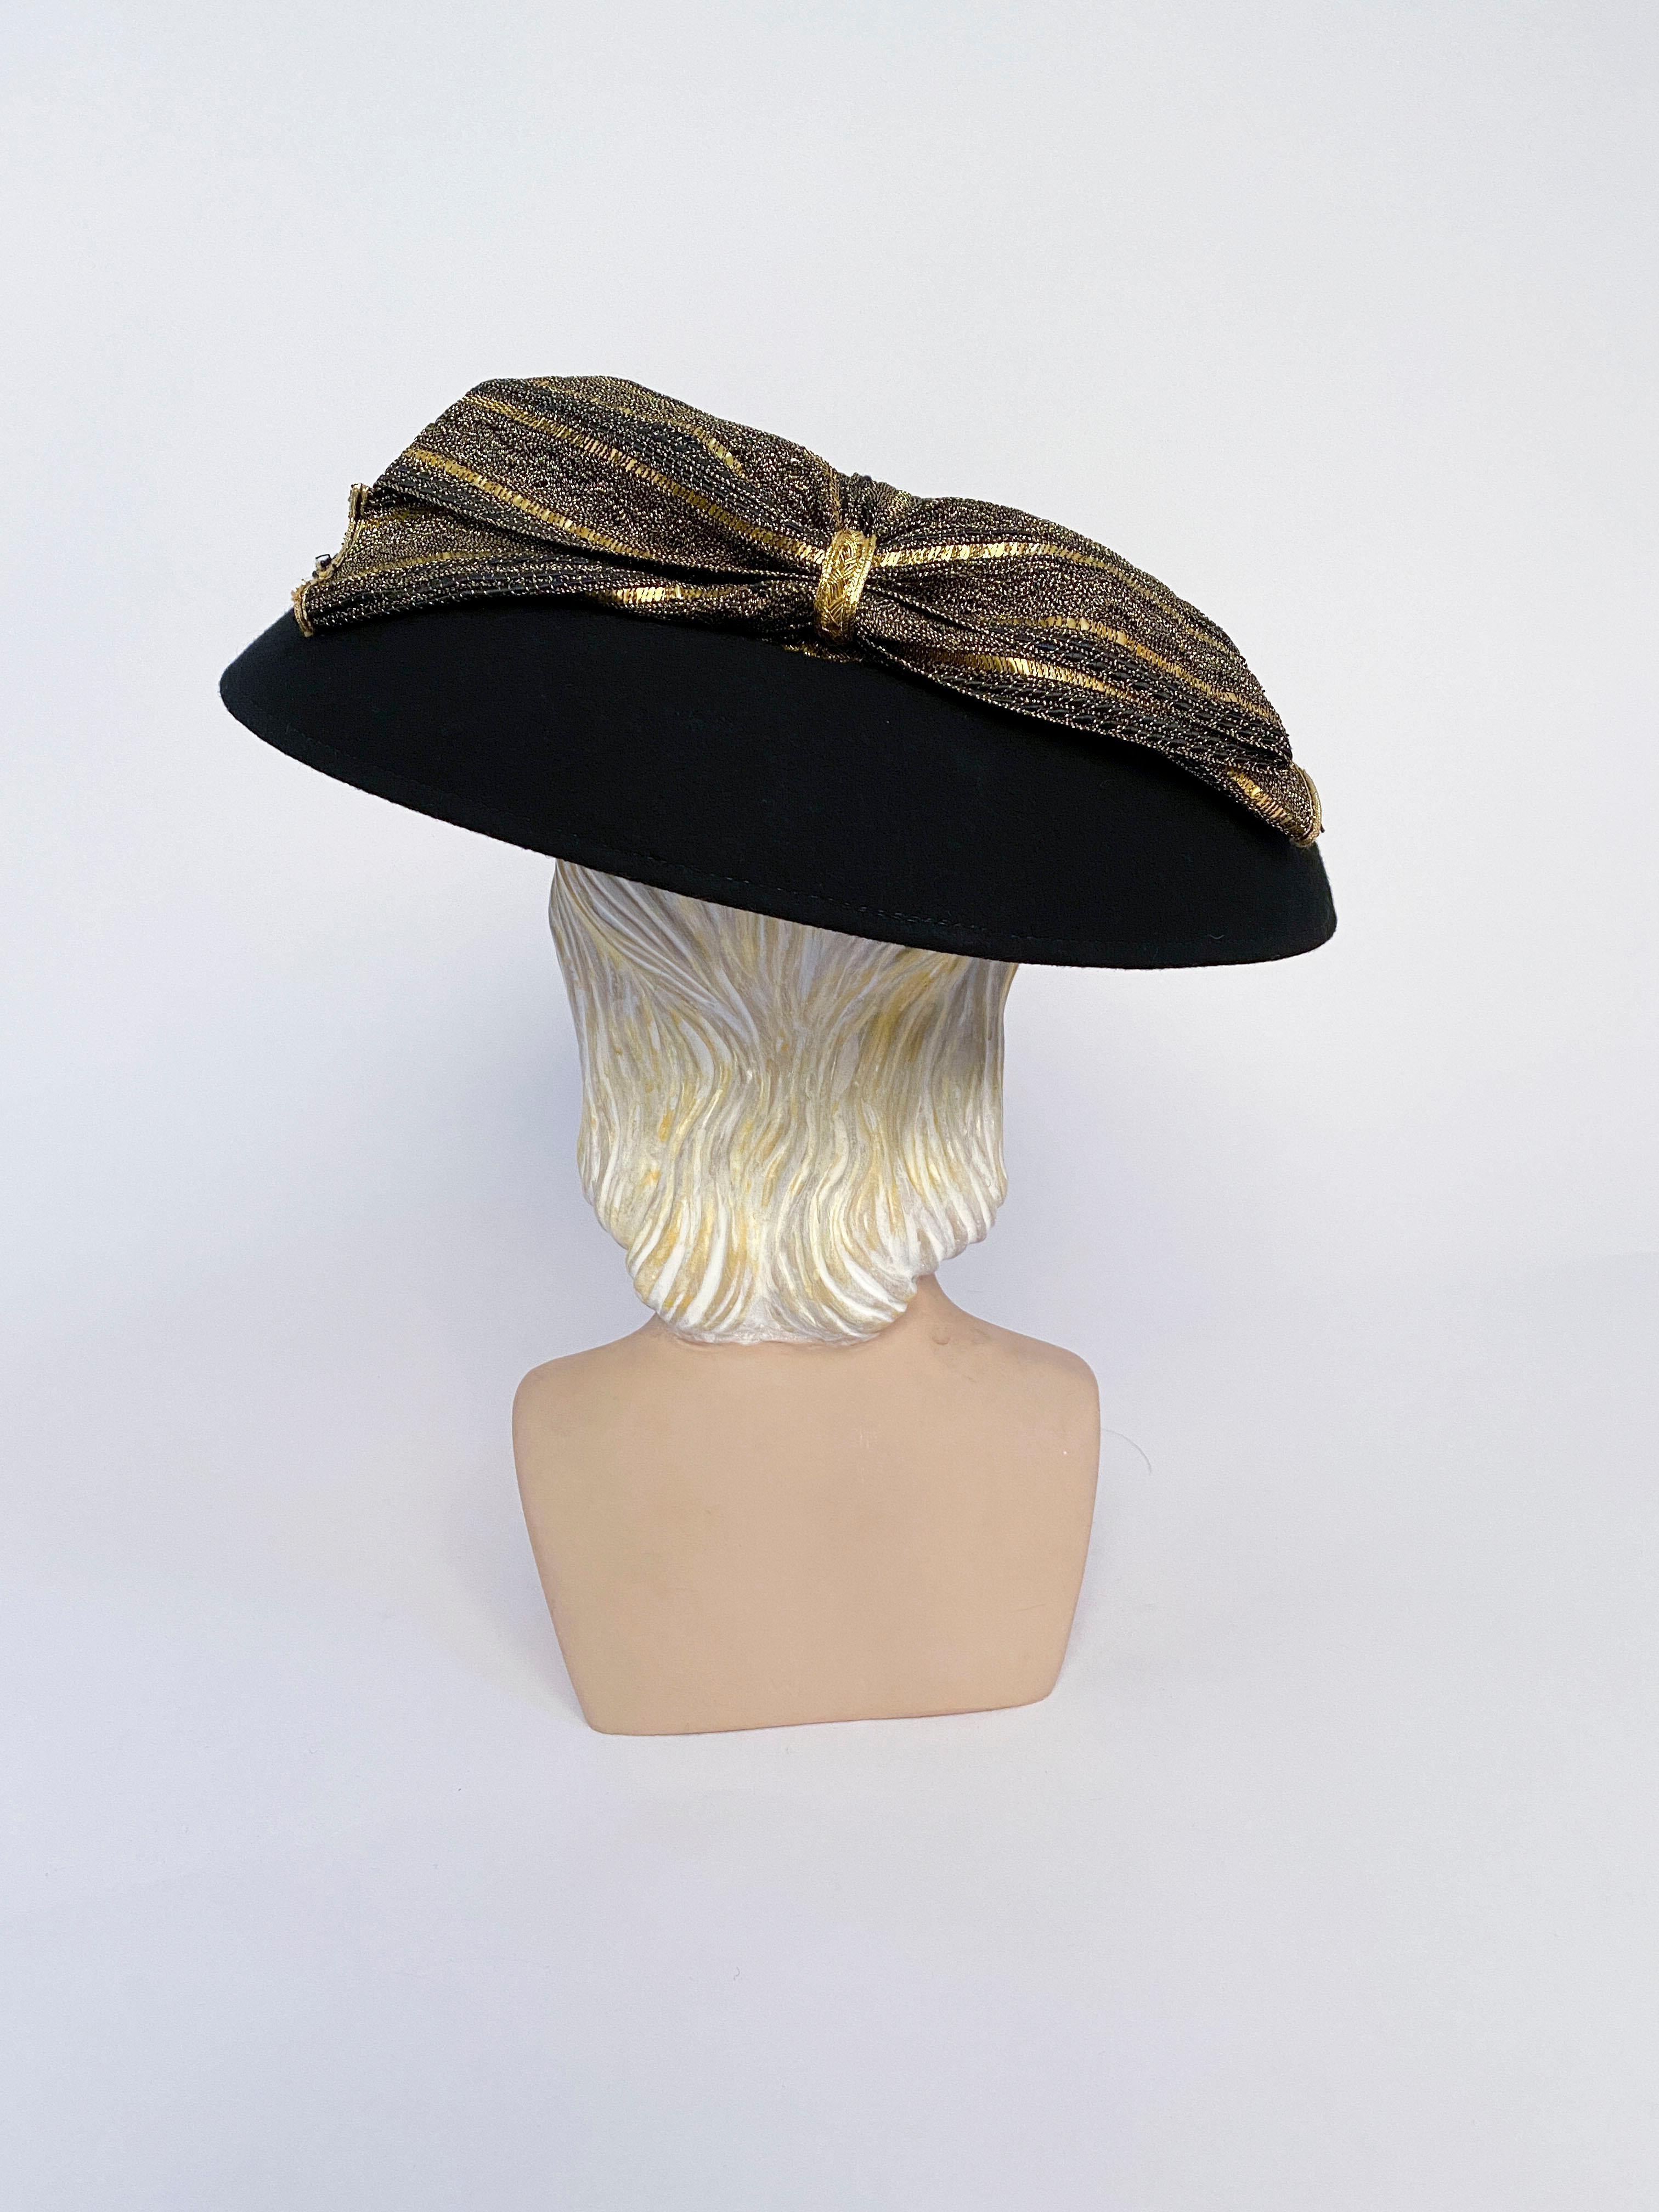 Women's 1980s Eric Javits Black Picture Hat With Gold Crown and Bow